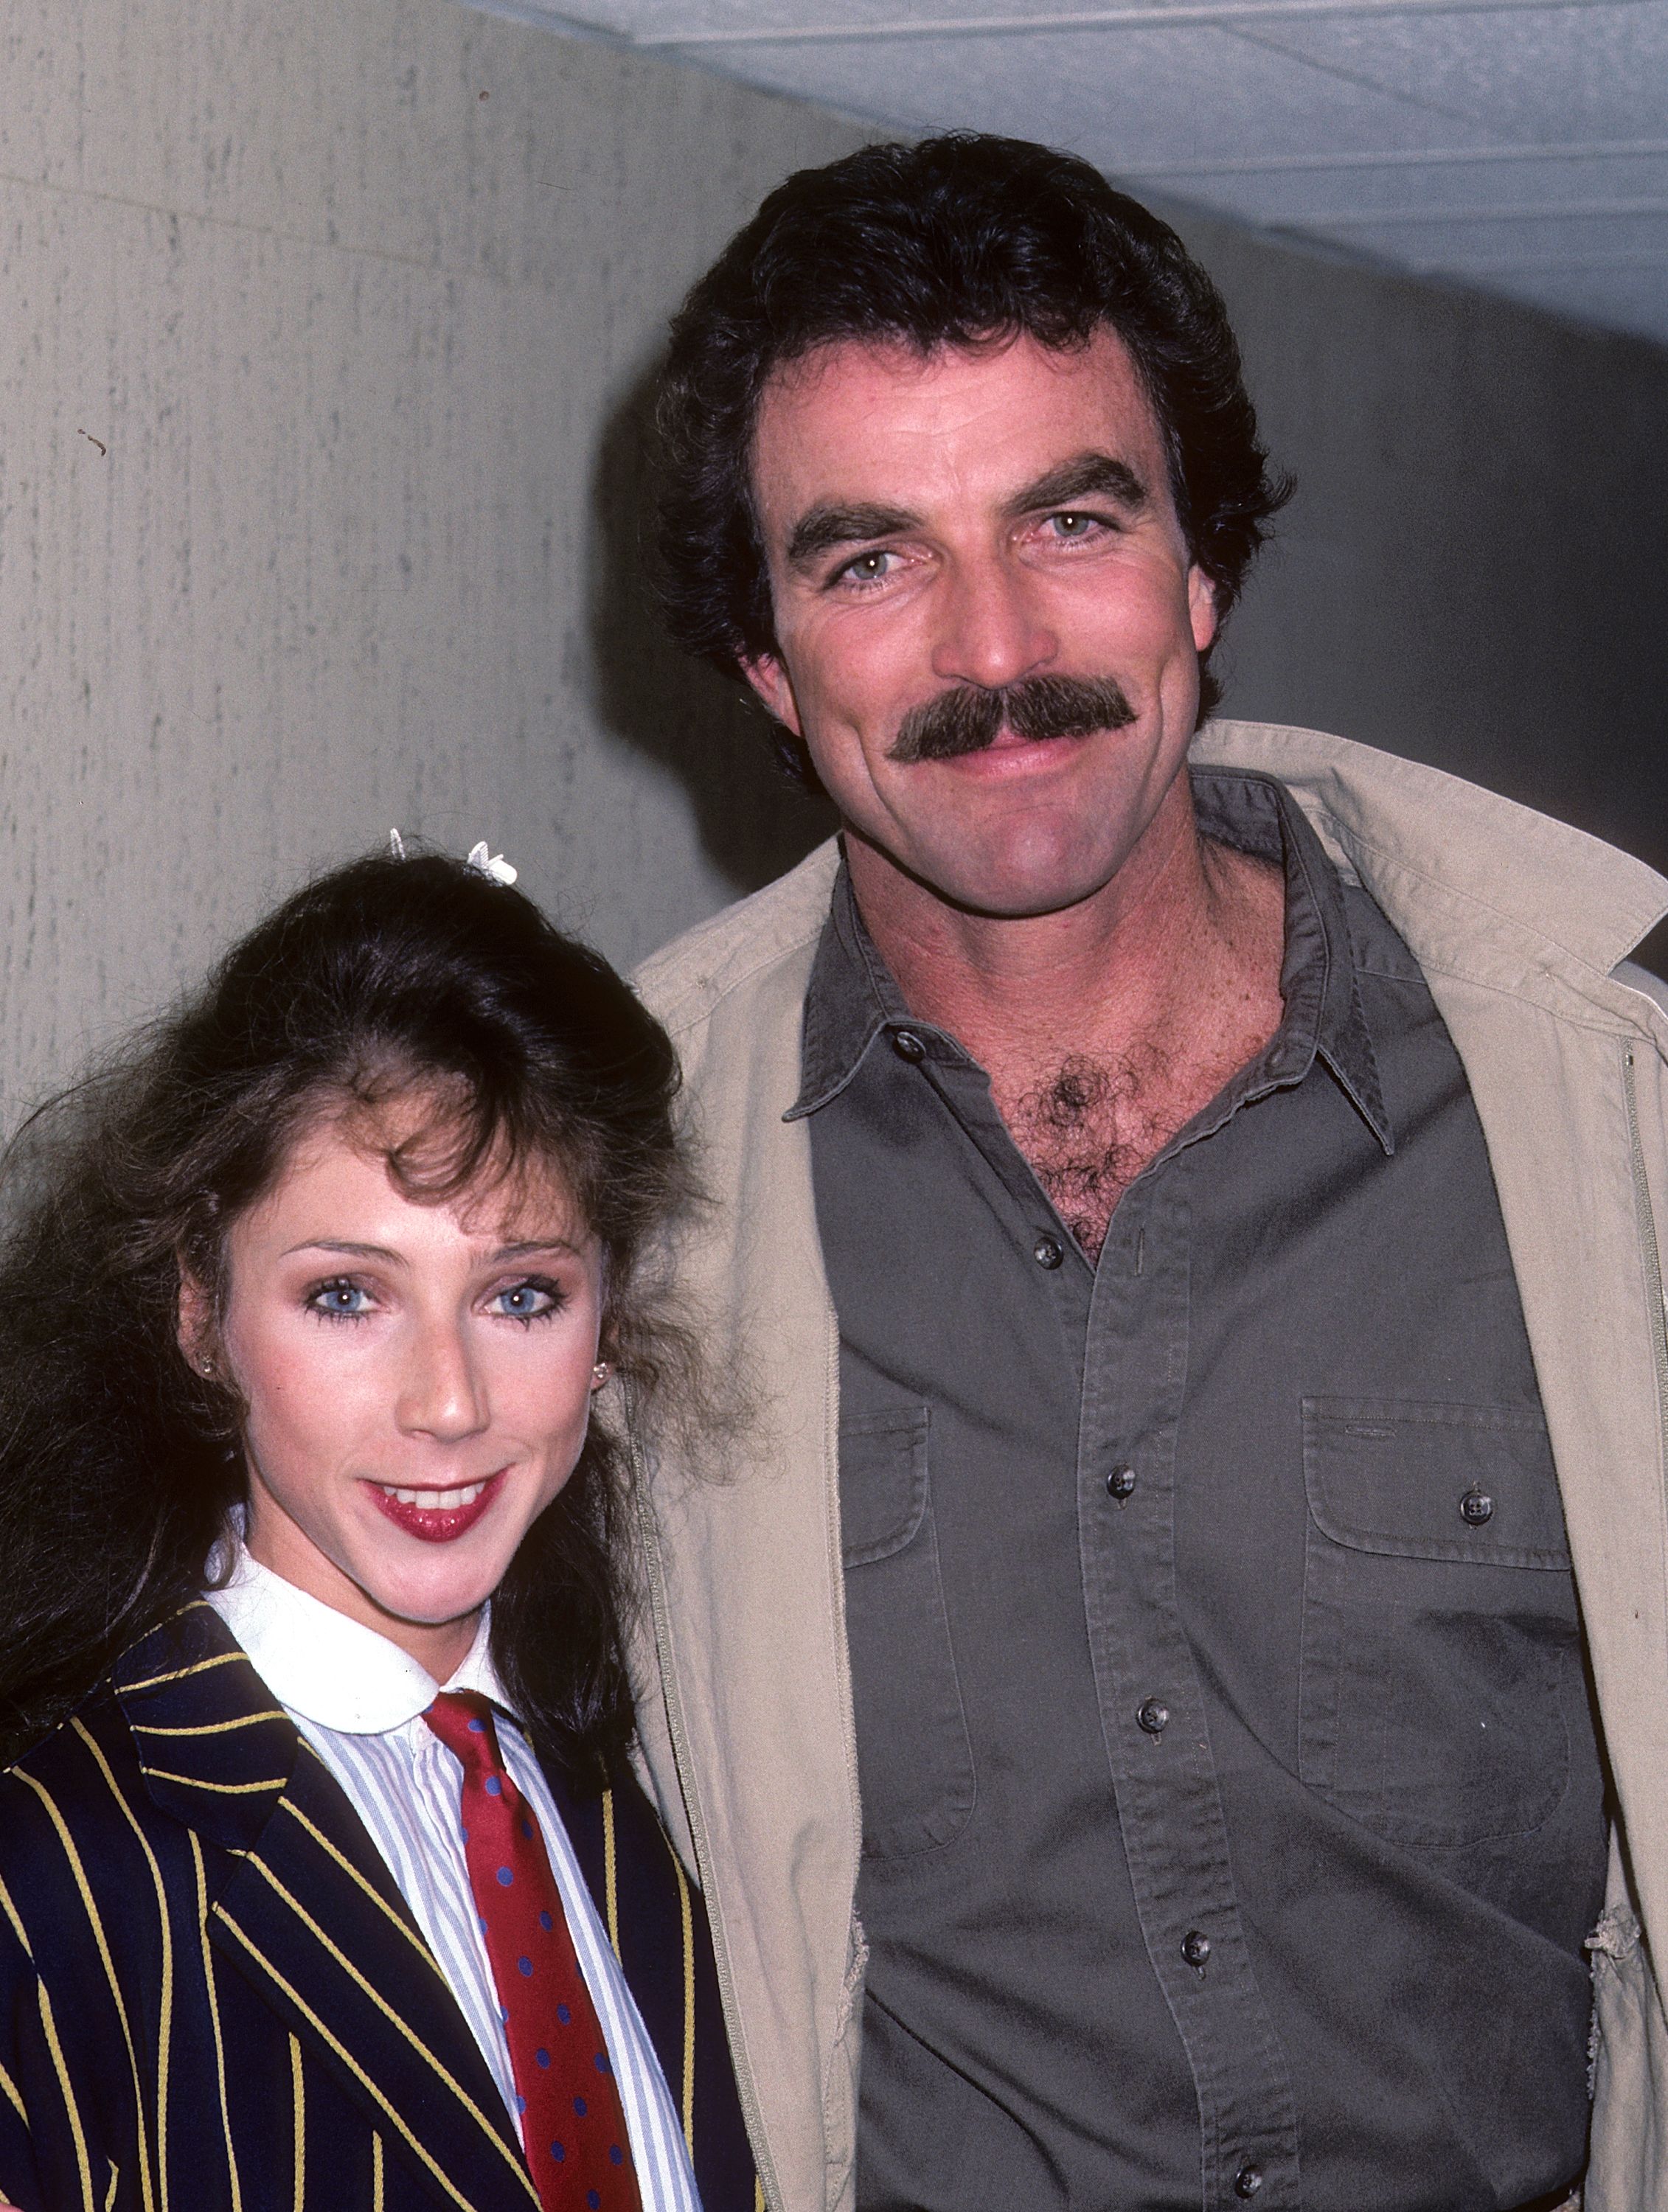 Tom Selleck and Jillie Mack during the "Late Night with David Letterman" on May 23, 1985 at Studio 6A, NBC Studios, 30 Rockefeller Plaza in New York City. | Source: Getty Images